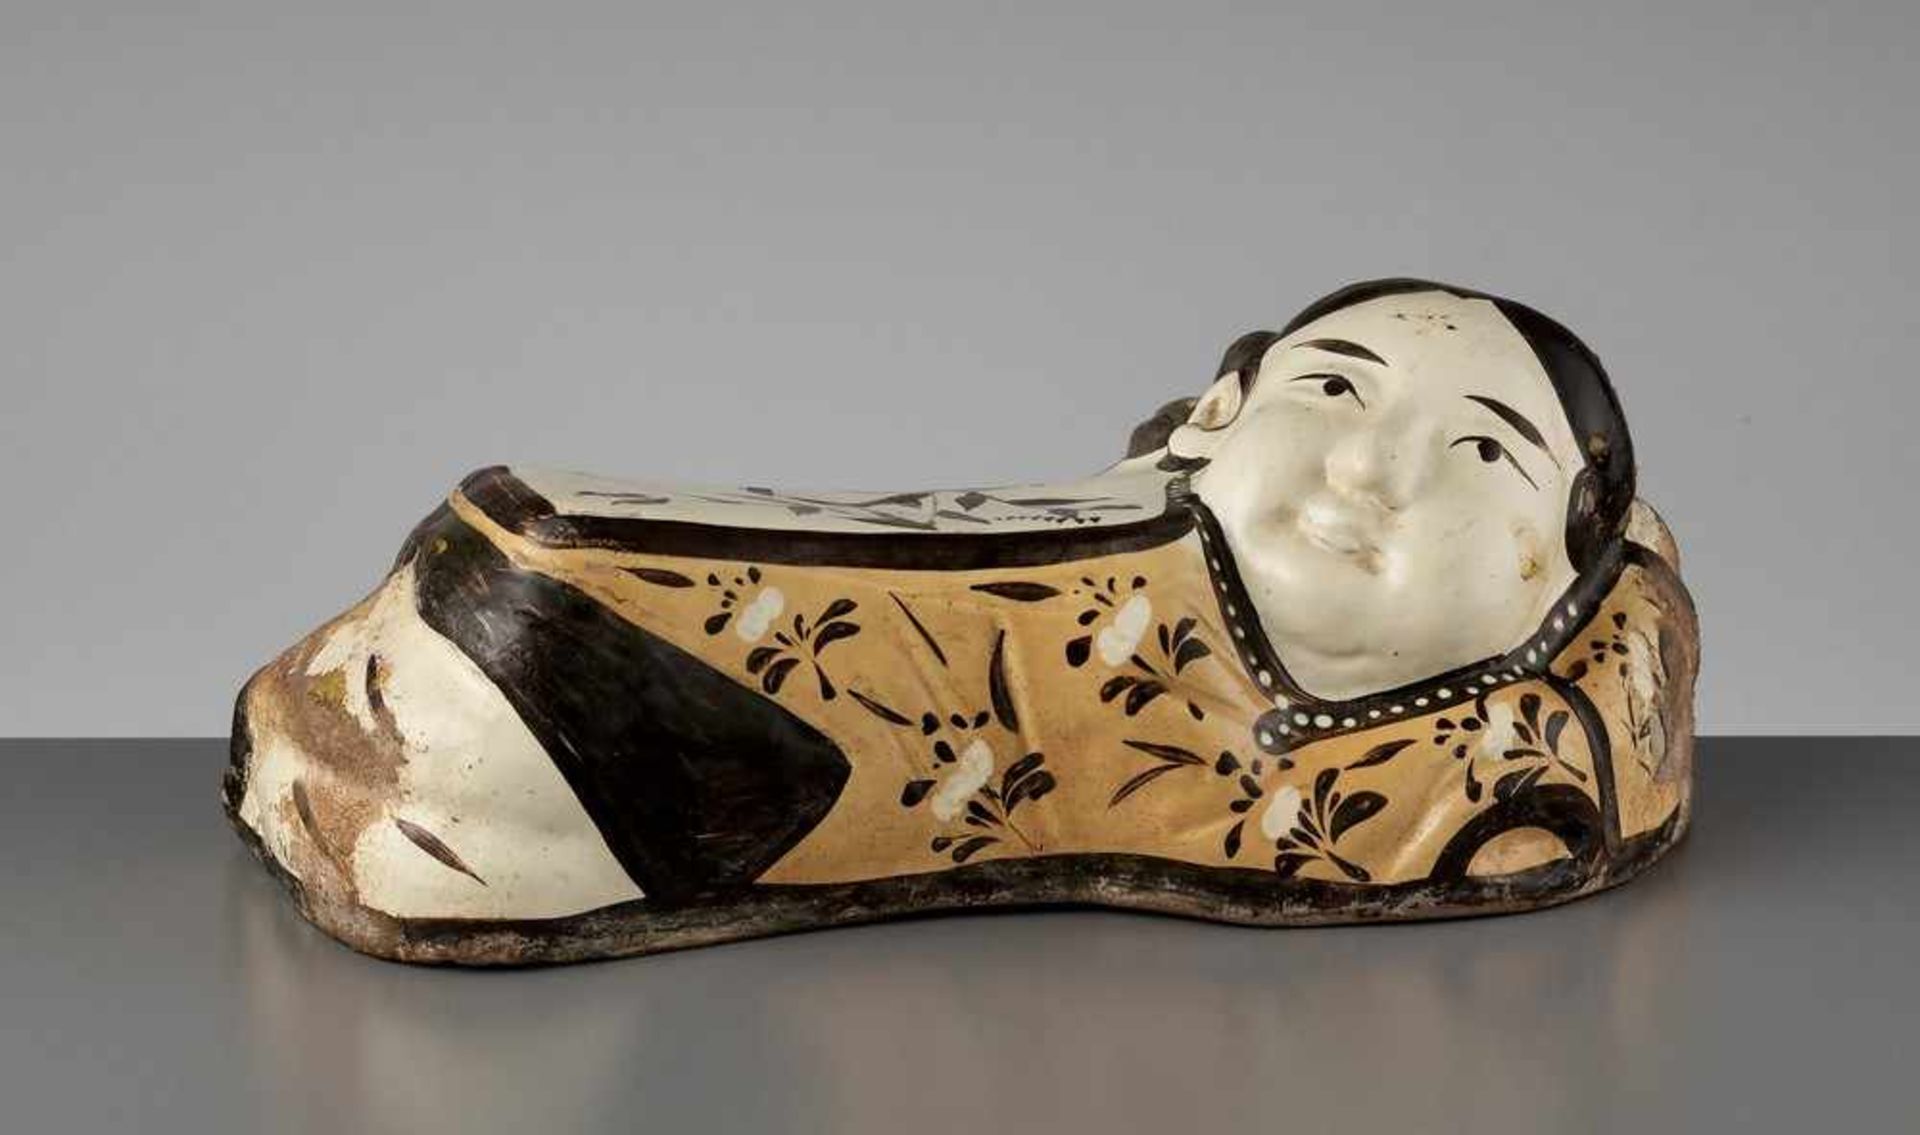 A PAINTED CIZHOU ‘SLEEPING LADY’ PILLOW, JIN DYNASTY China, 1115-1234. Modeled in the form of a